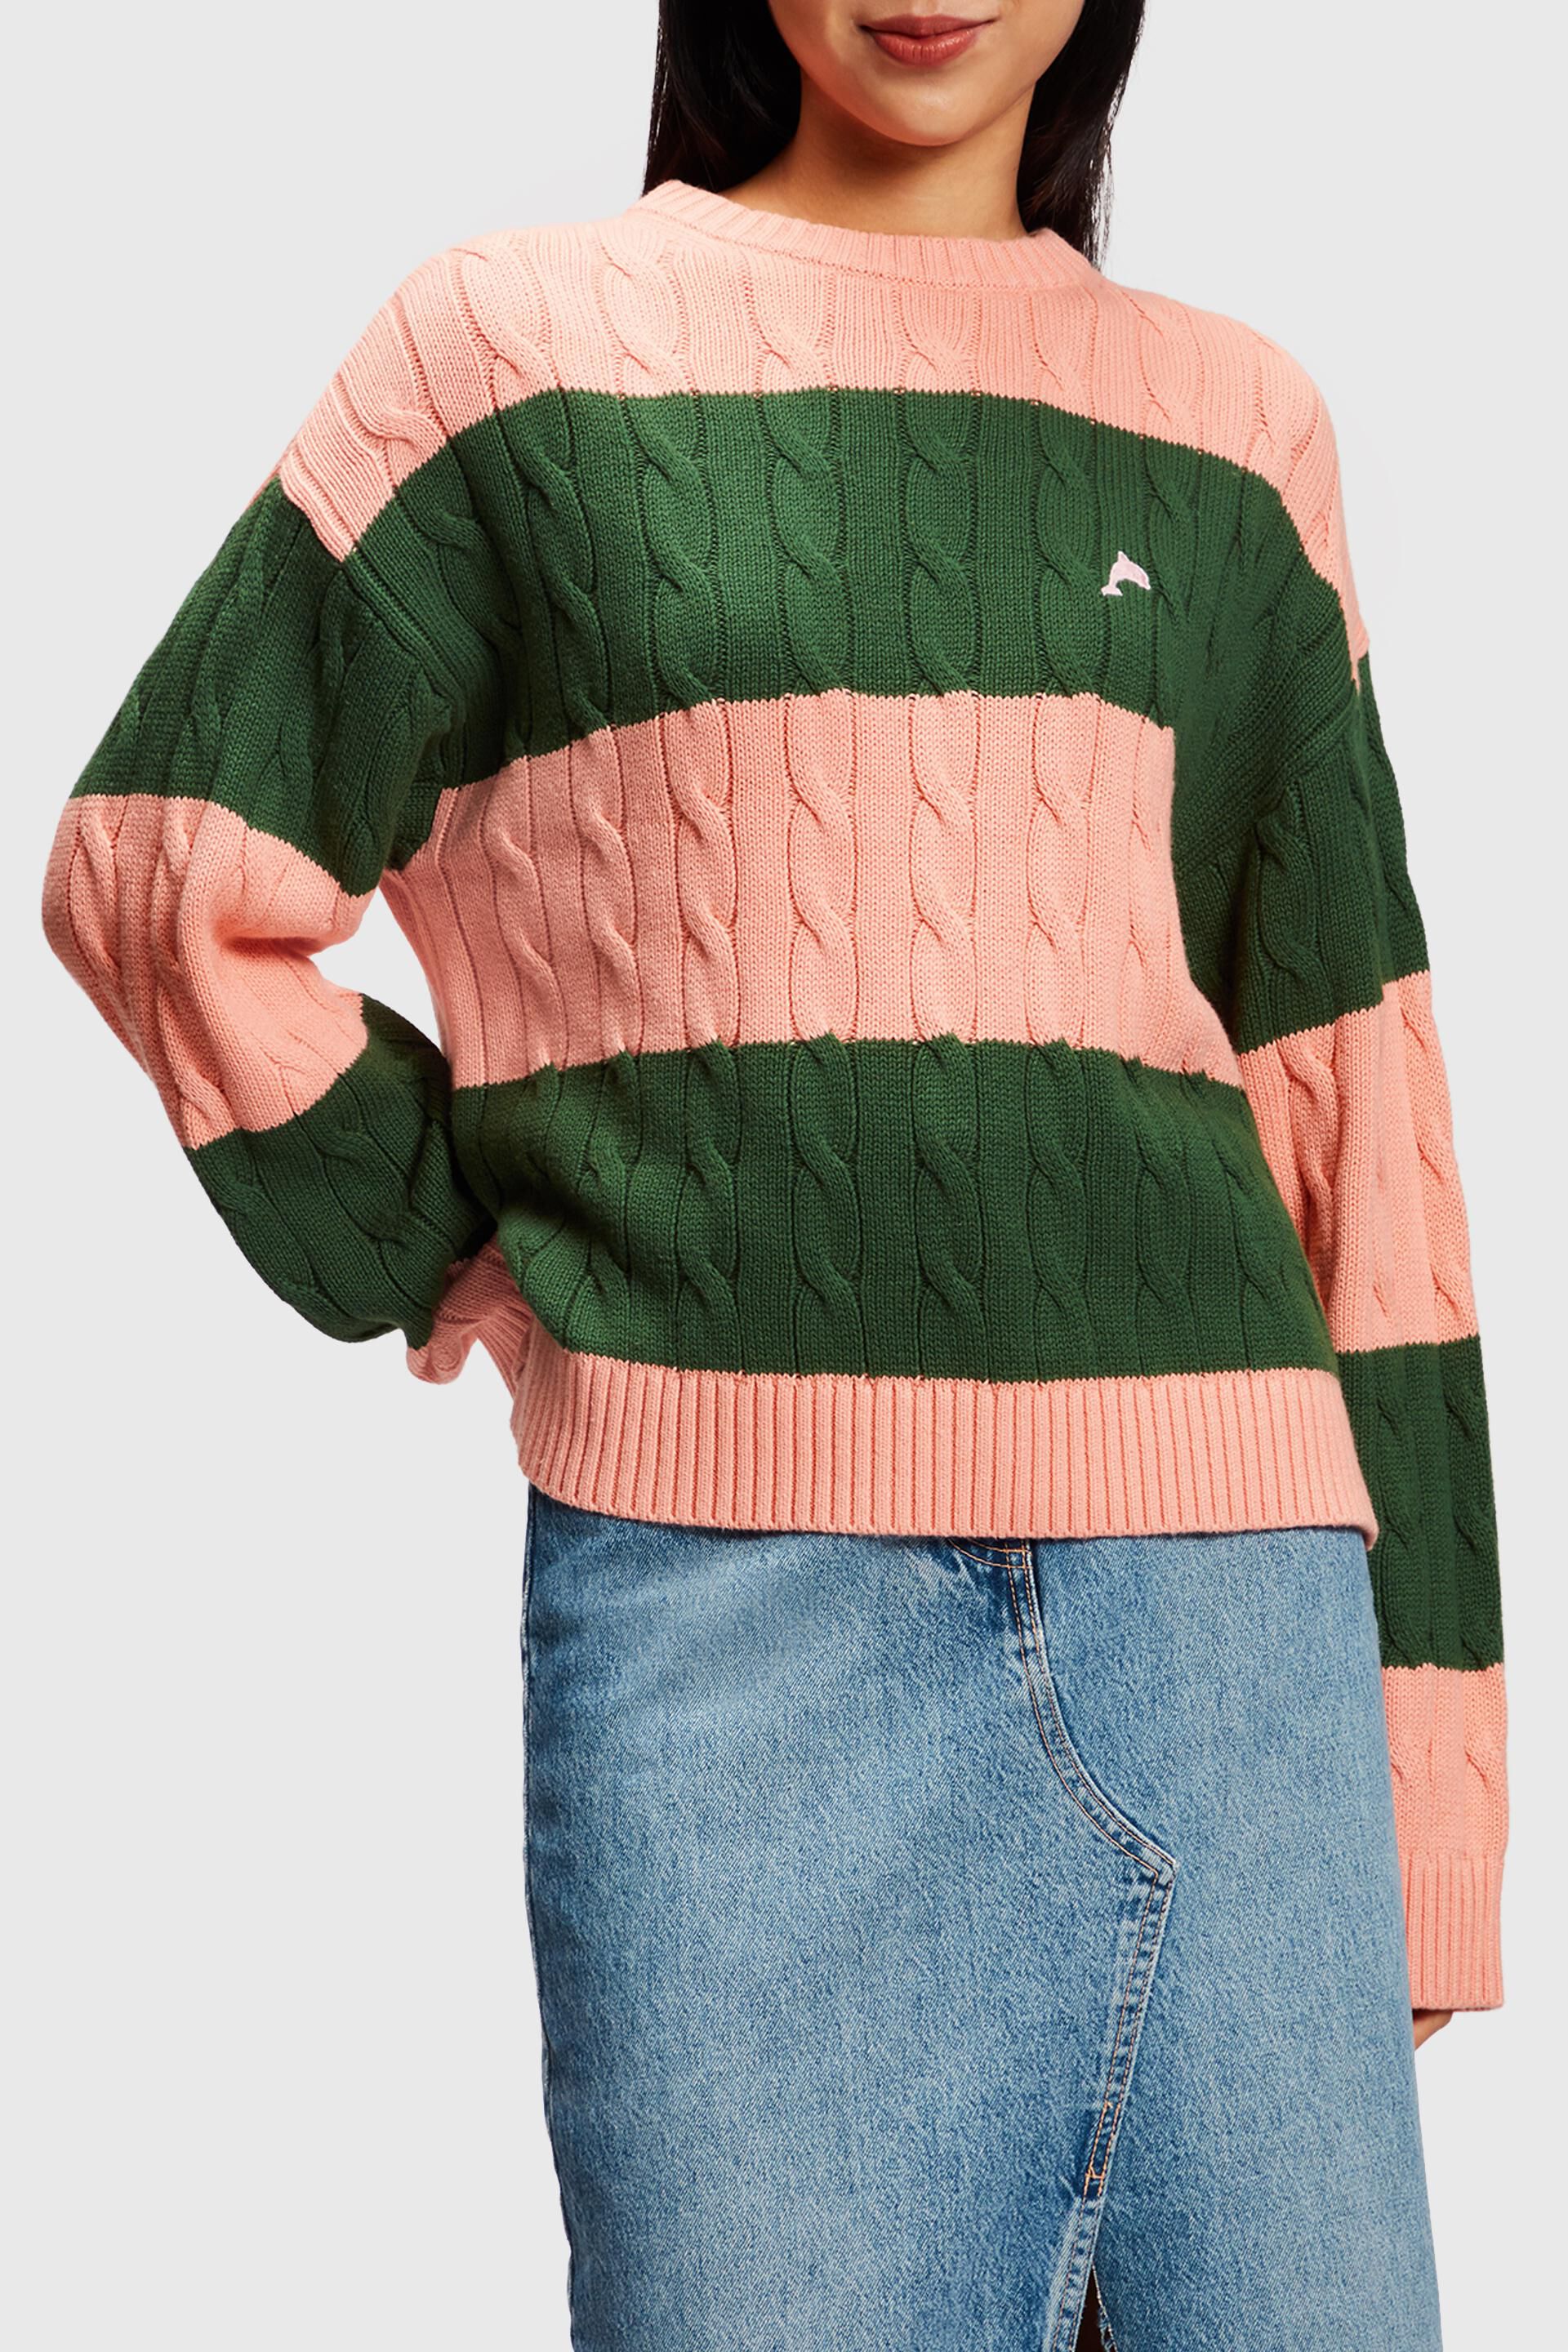 Esprit Striped sweater cable knit